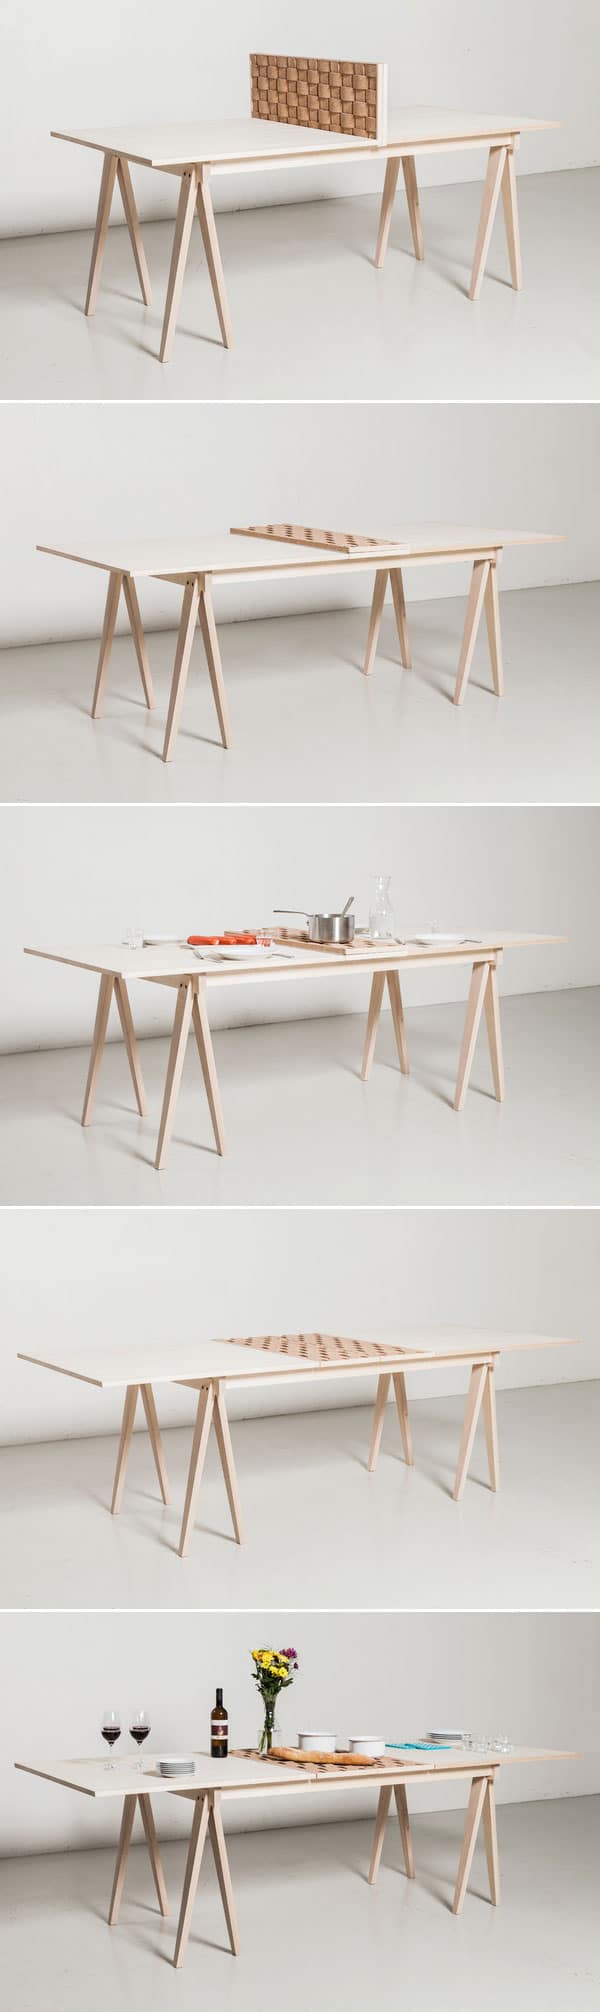 table-manger-extensible-03